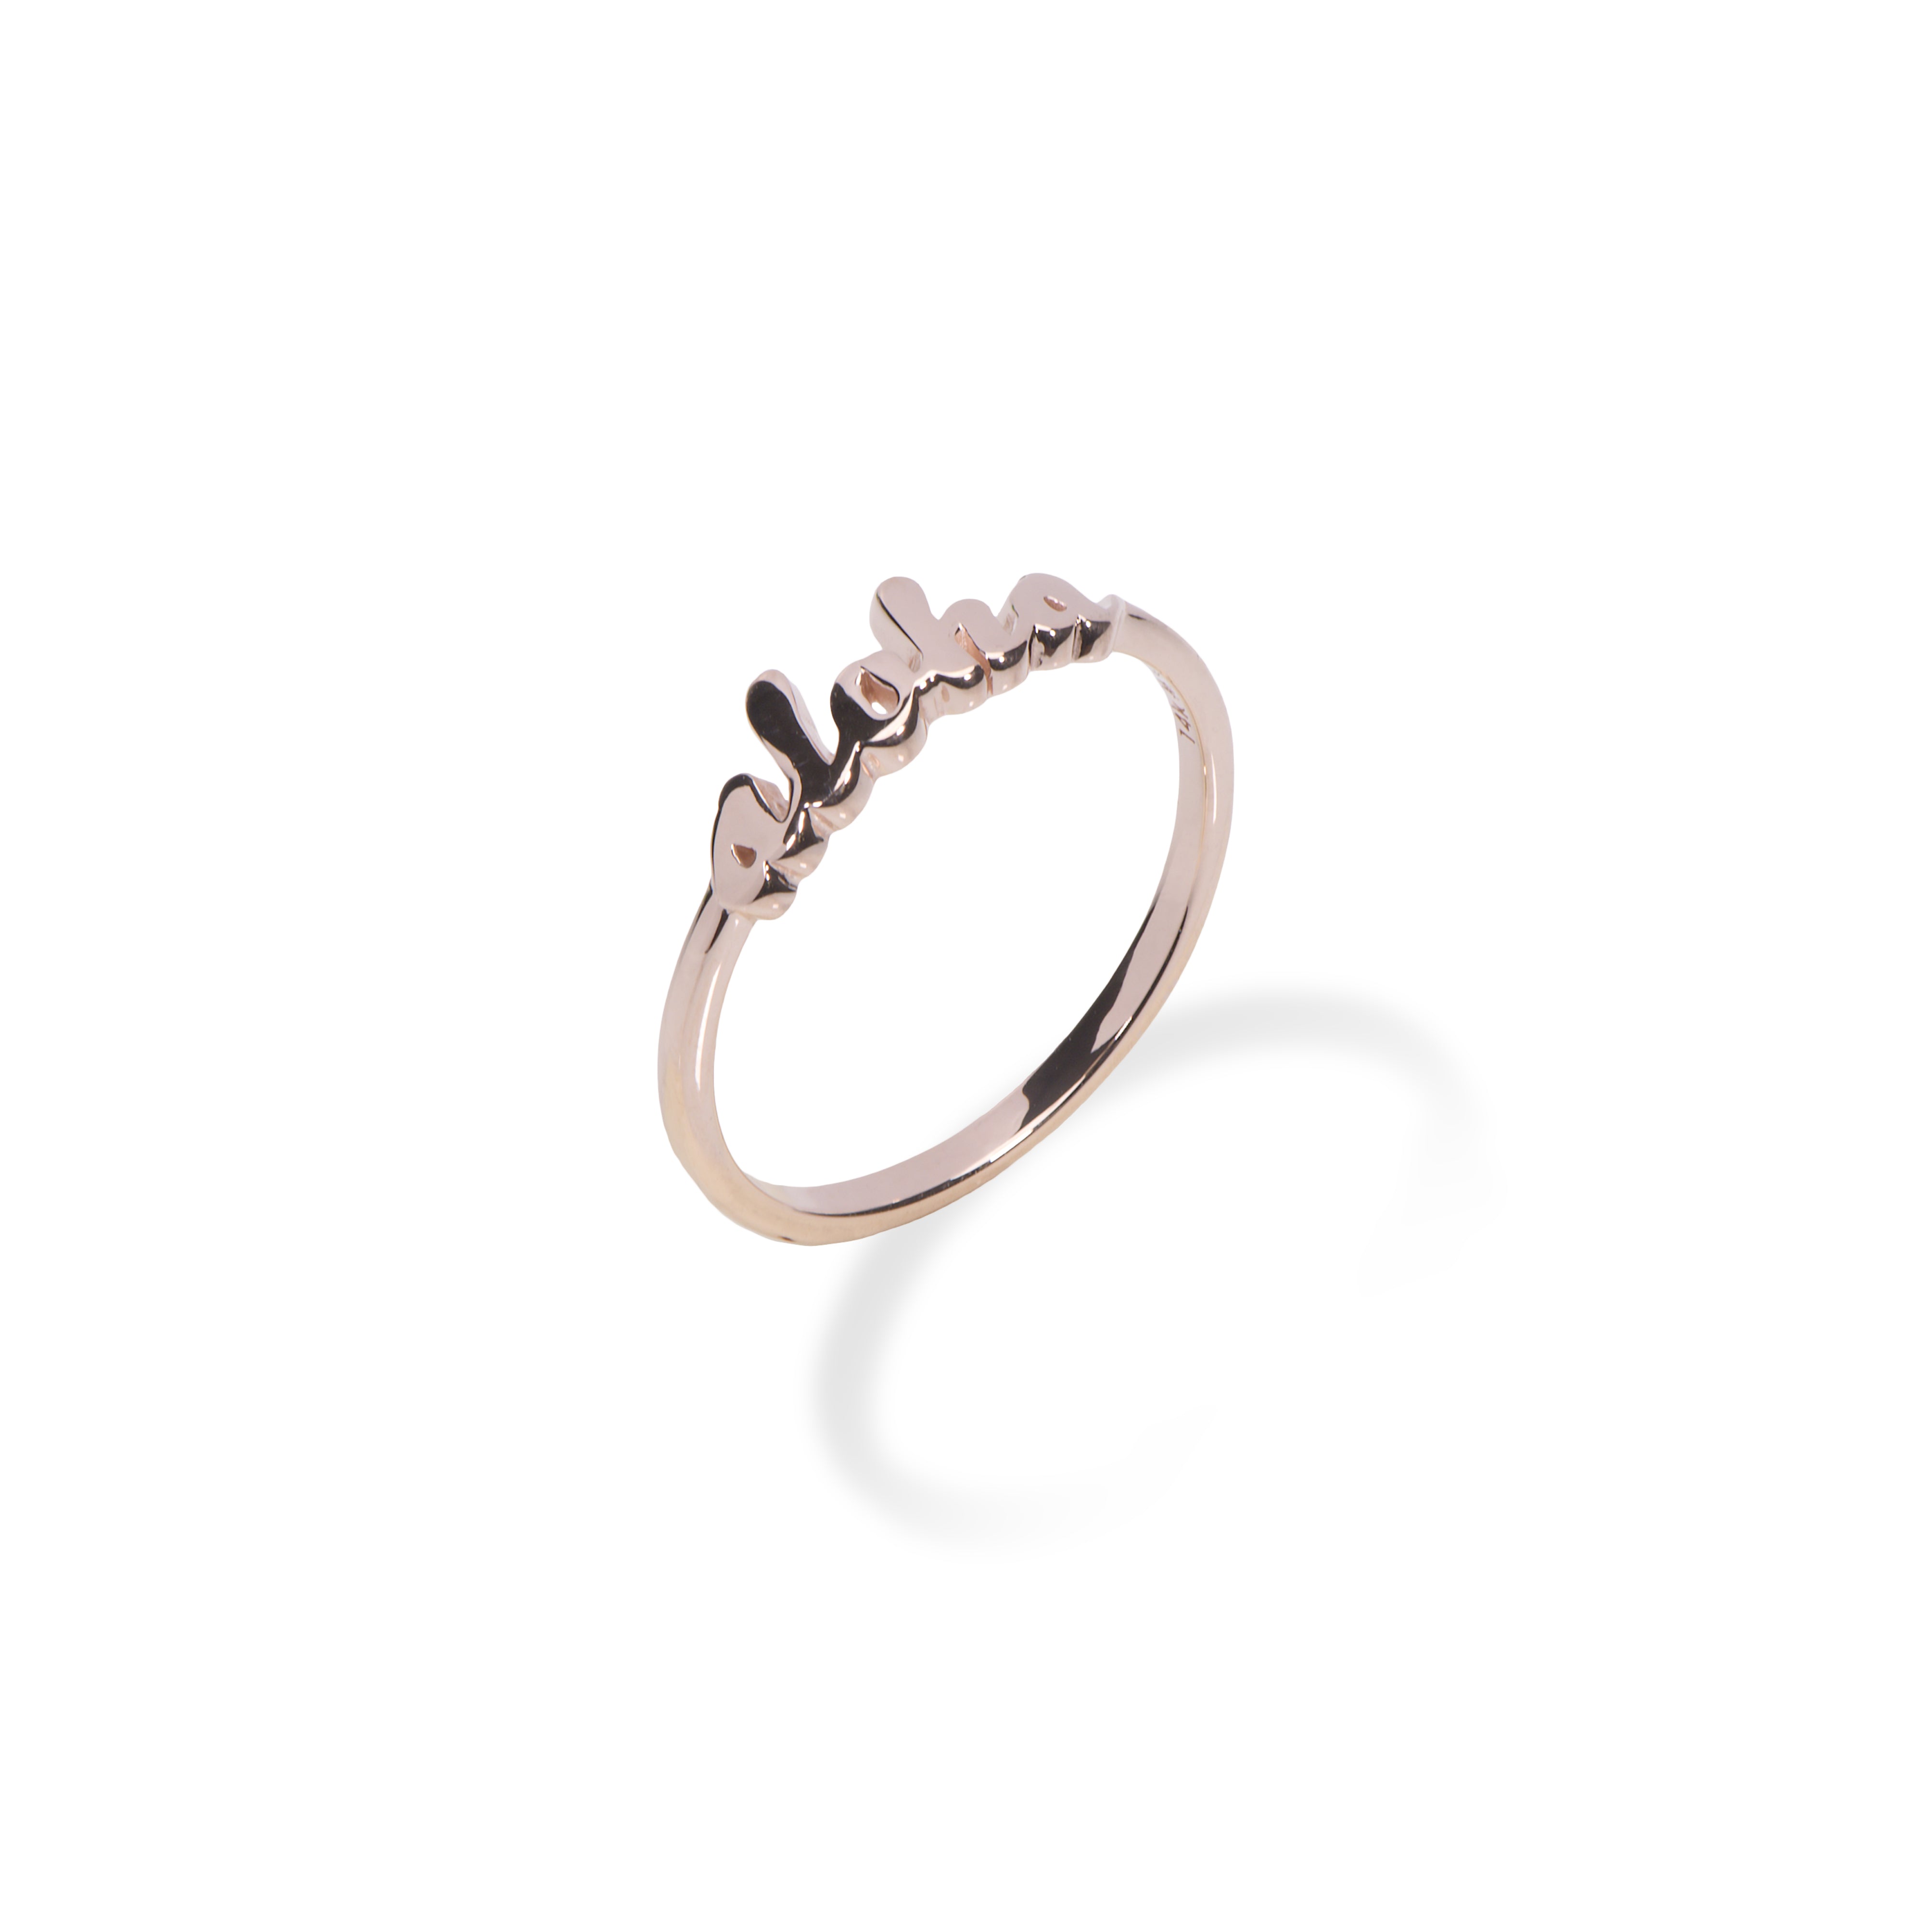 Aloha Ring in Rose Gold - Maui Divers Jewelry